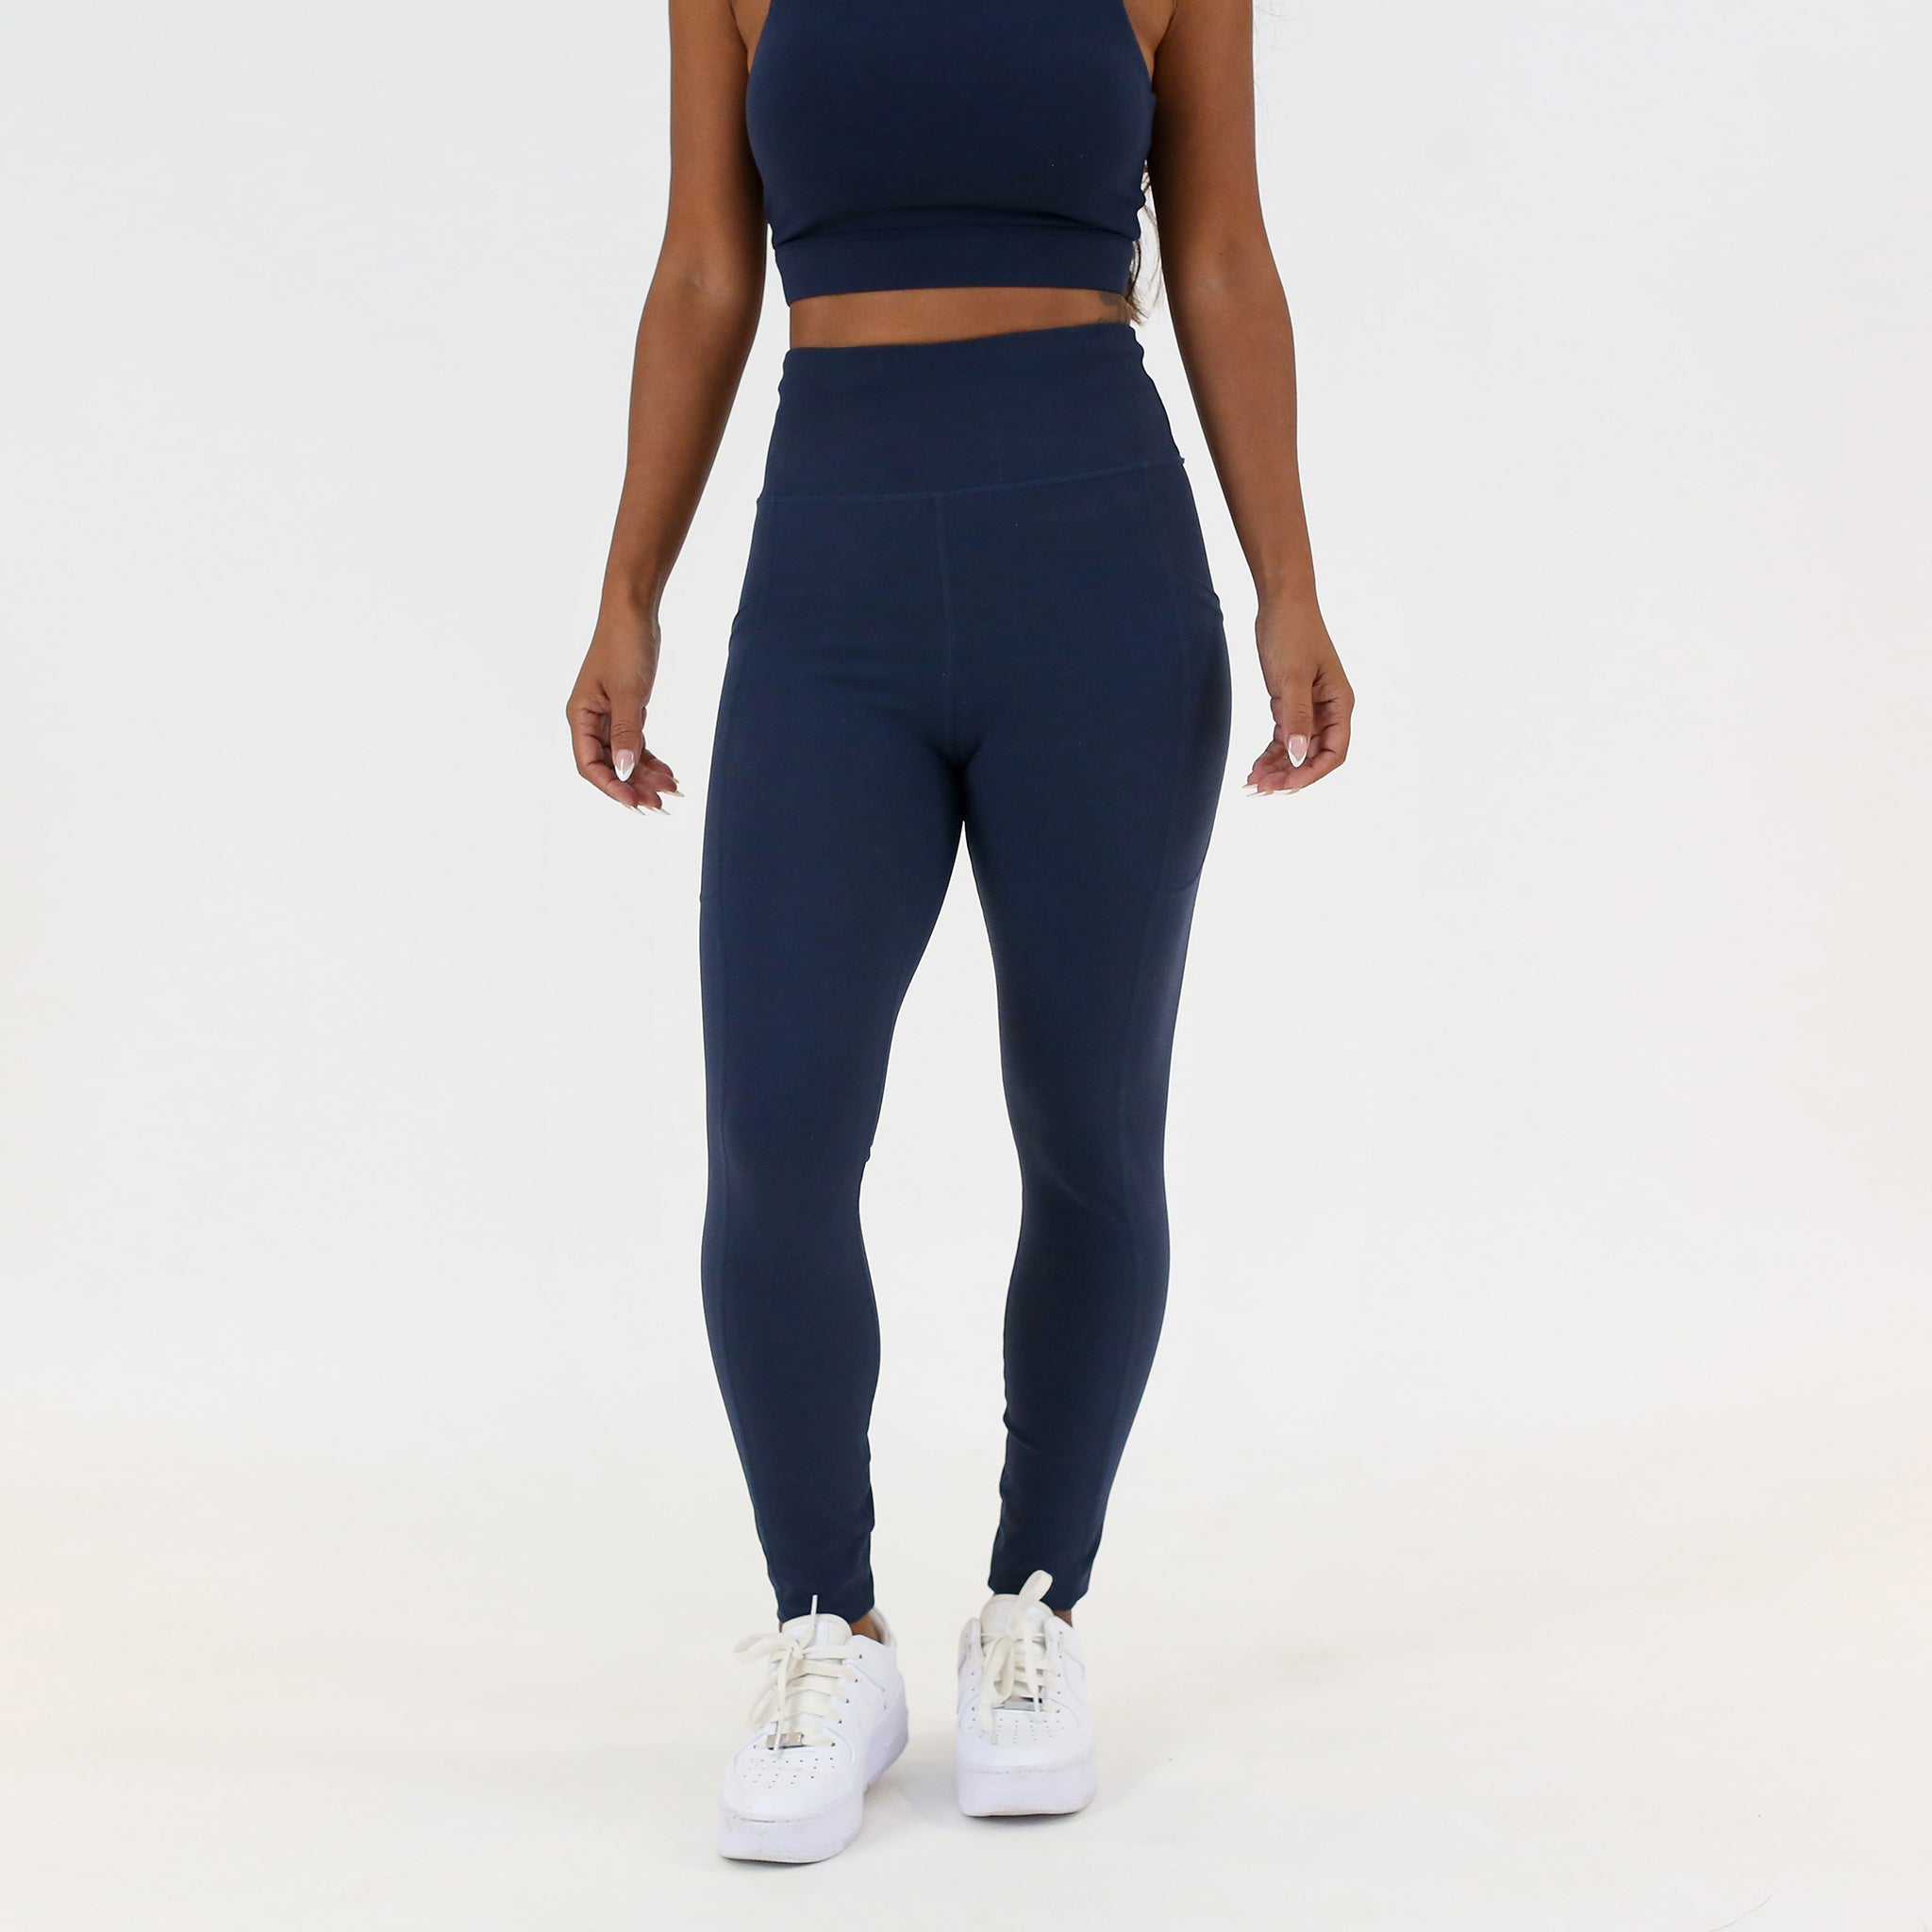 Size Charts for leggings, capris and shorts ⎮ MOOV Activewear – Moov  Activewear